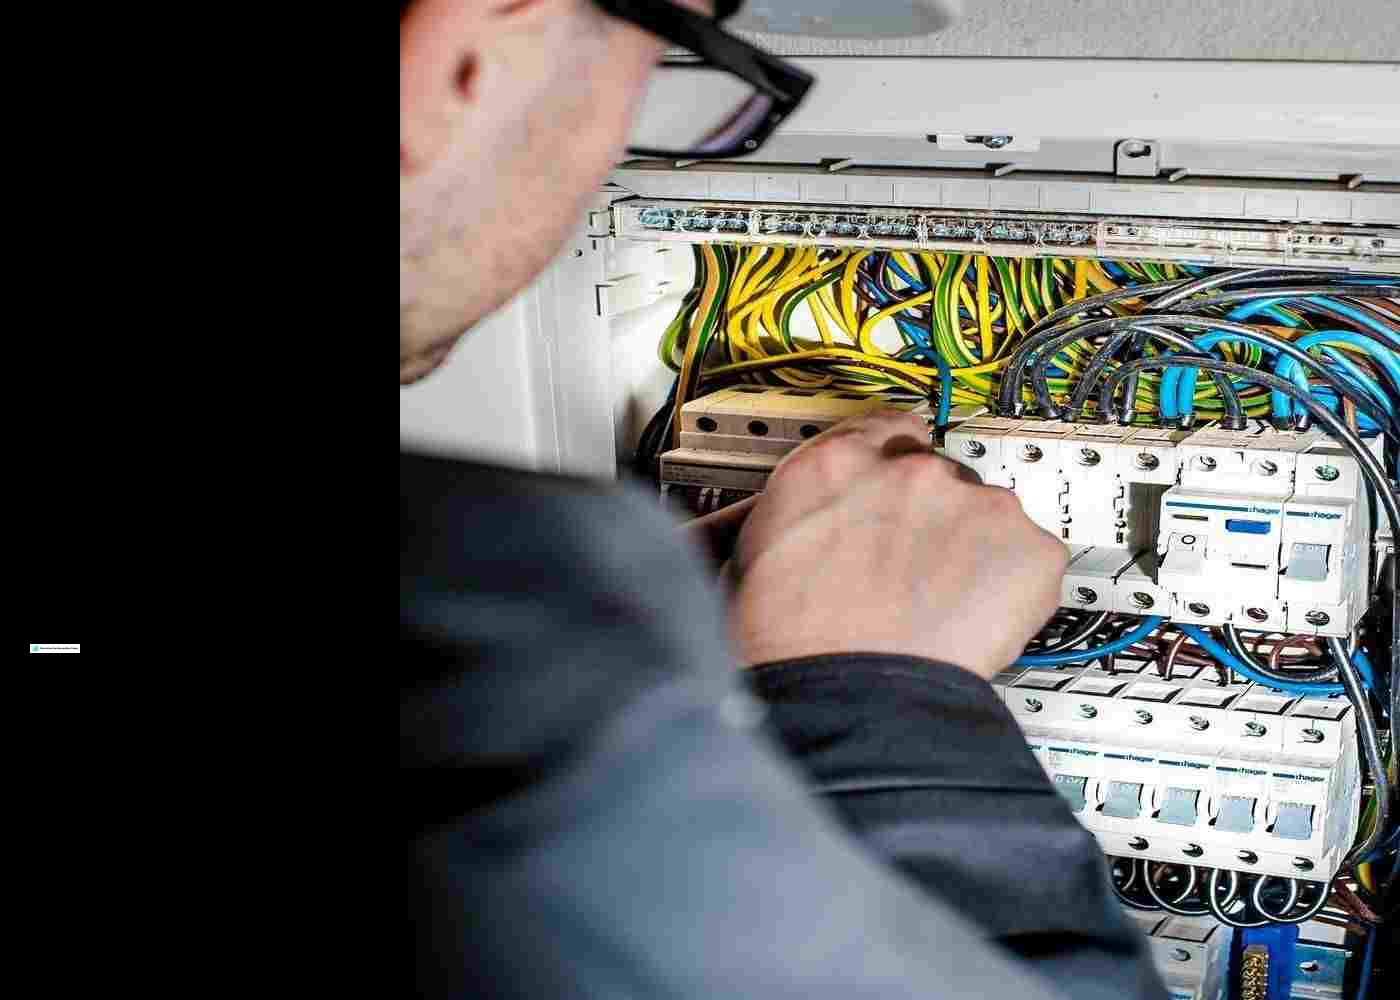 Electrical Systems Newport Beach